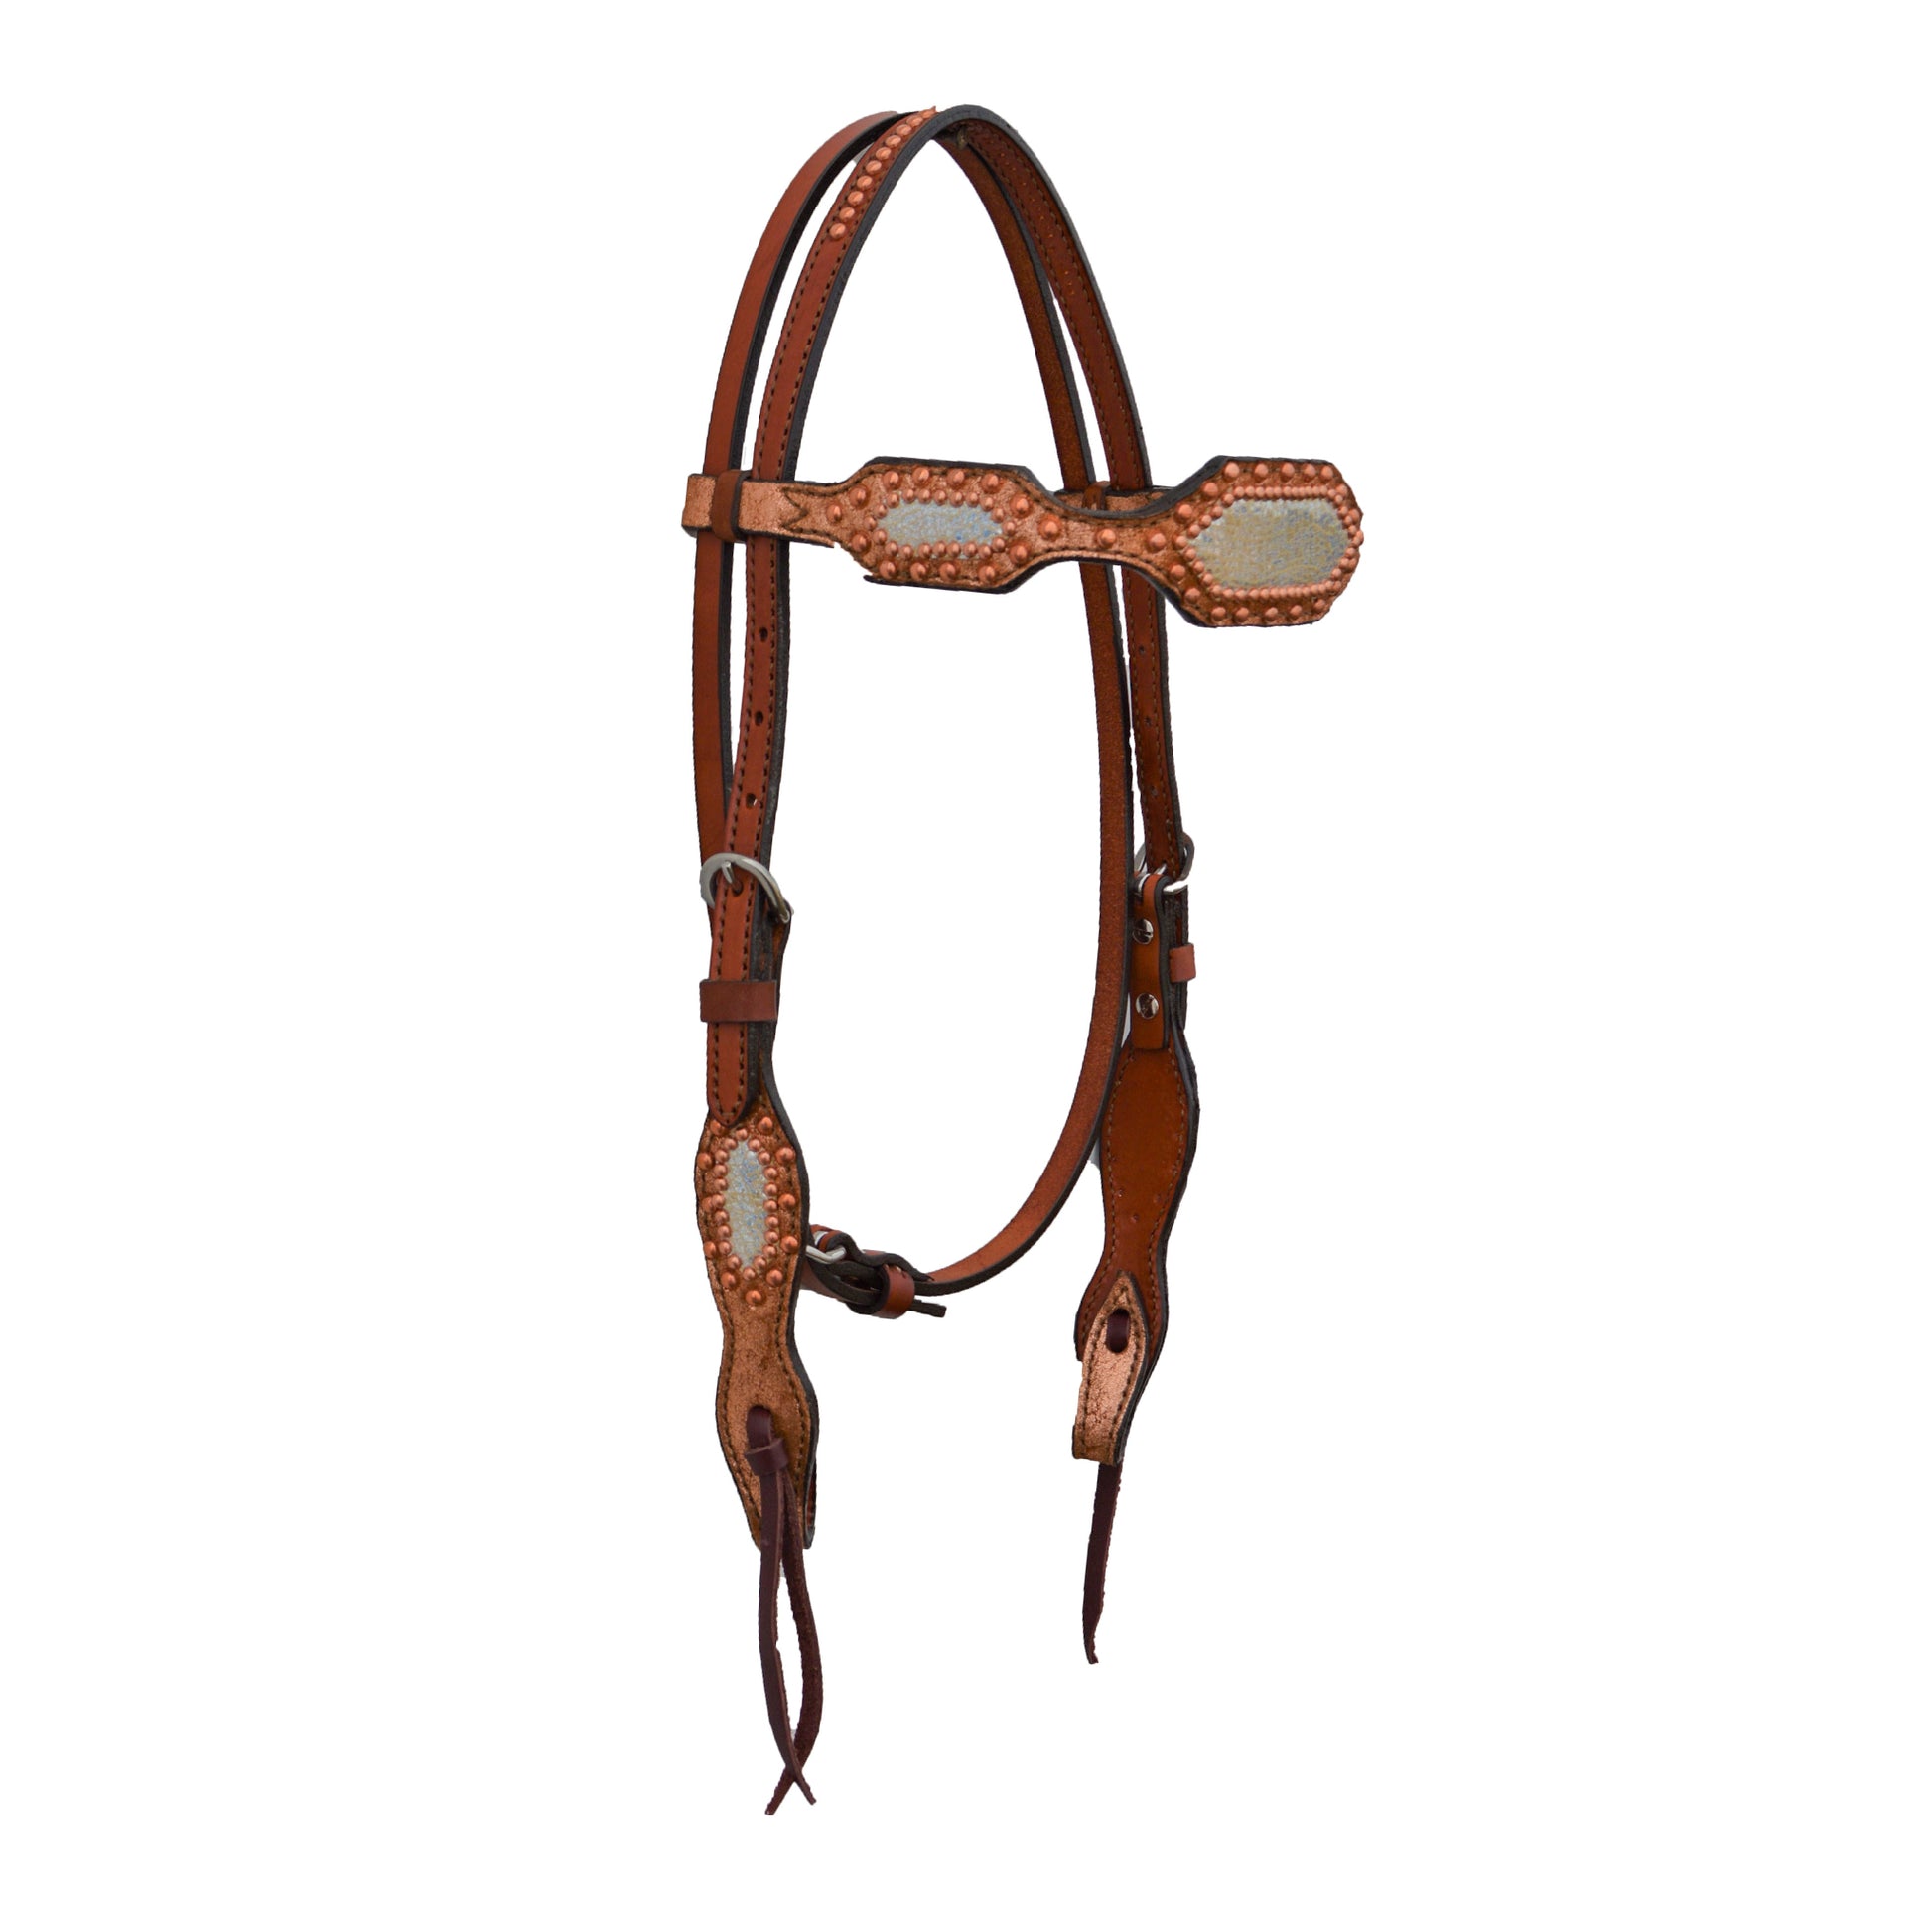 2" Scalloped browband headstall toast leather copper crackle background overlay and holographic overlay with copper spots.